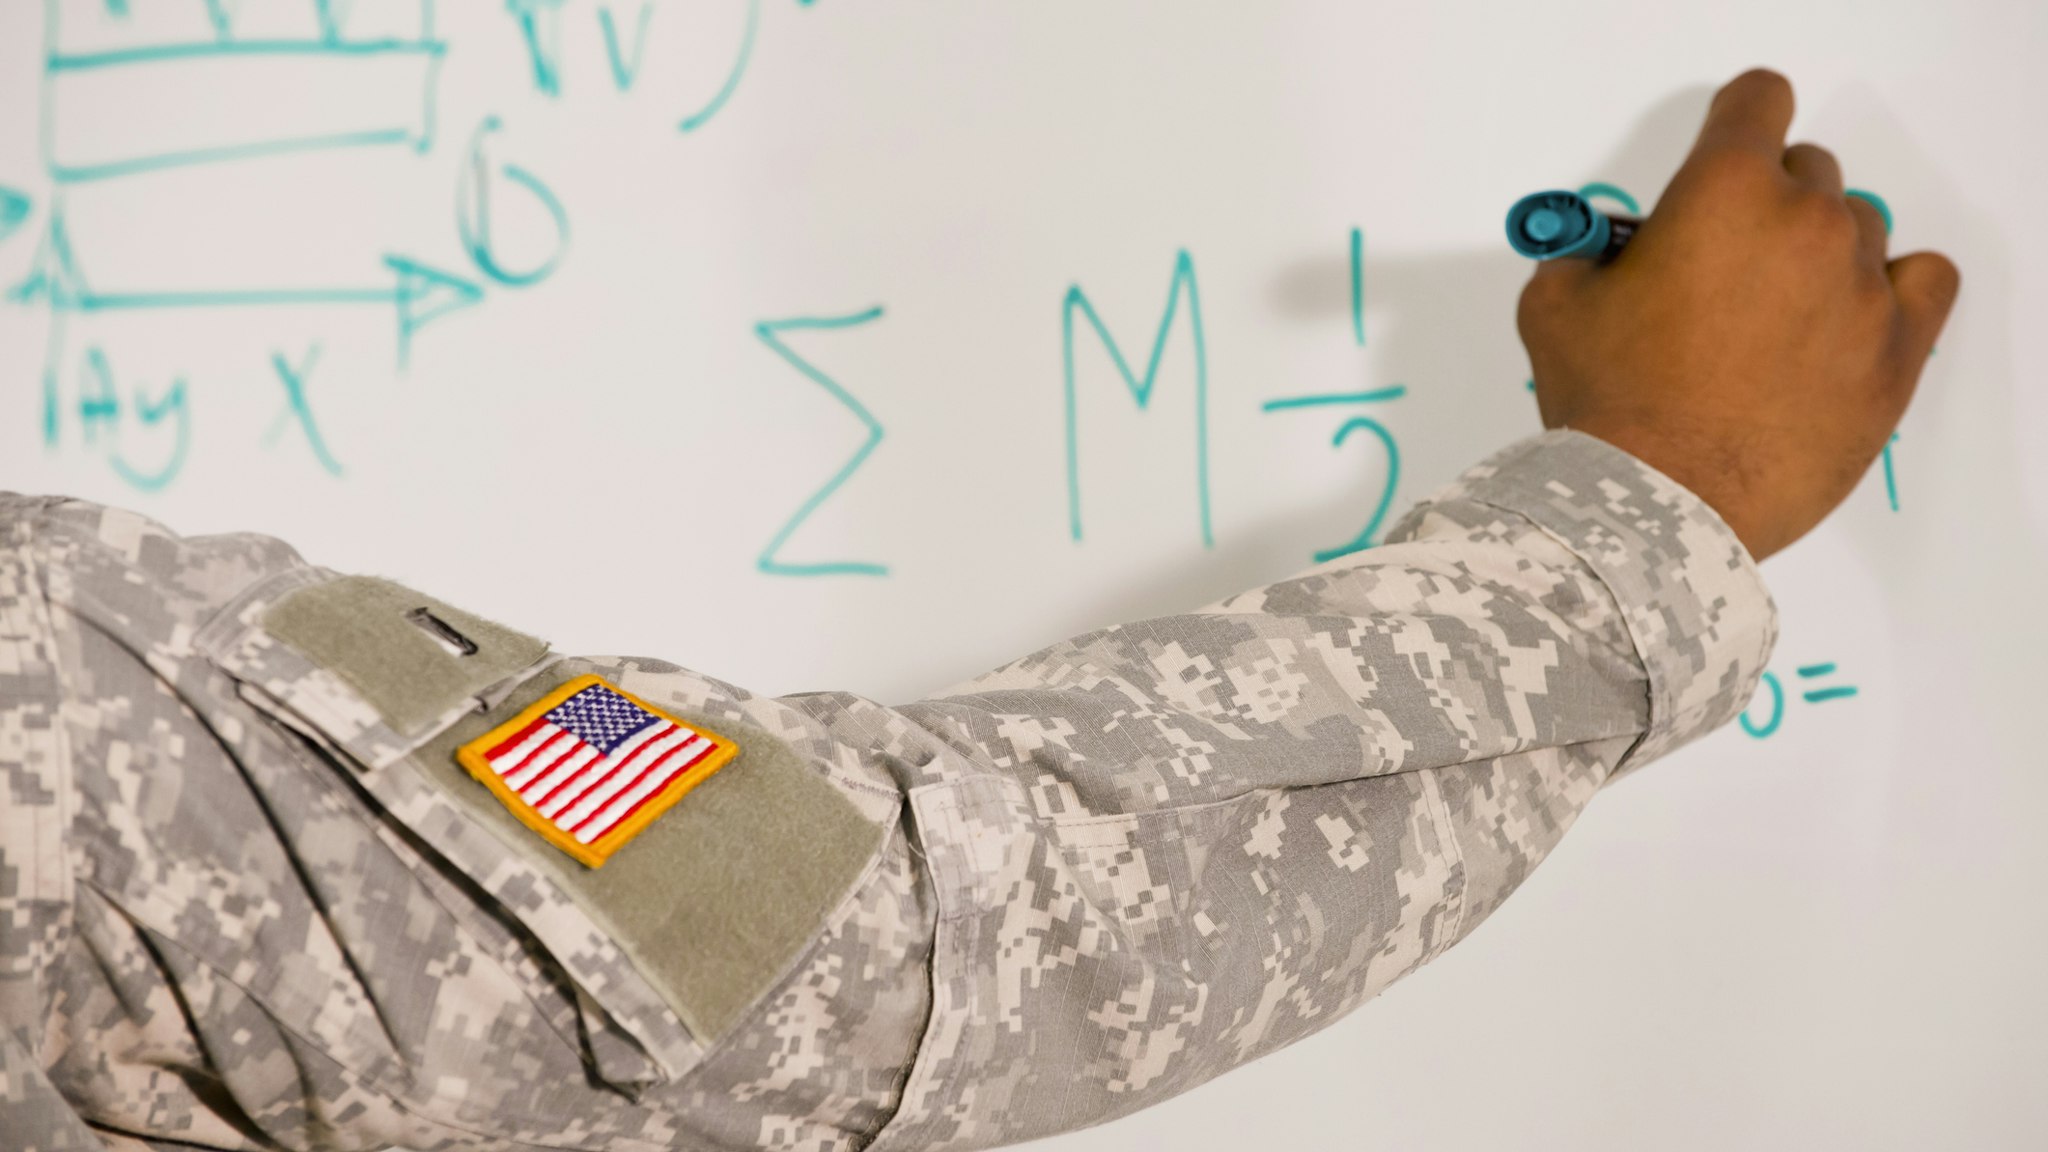 Black soldier writing on whiteboard